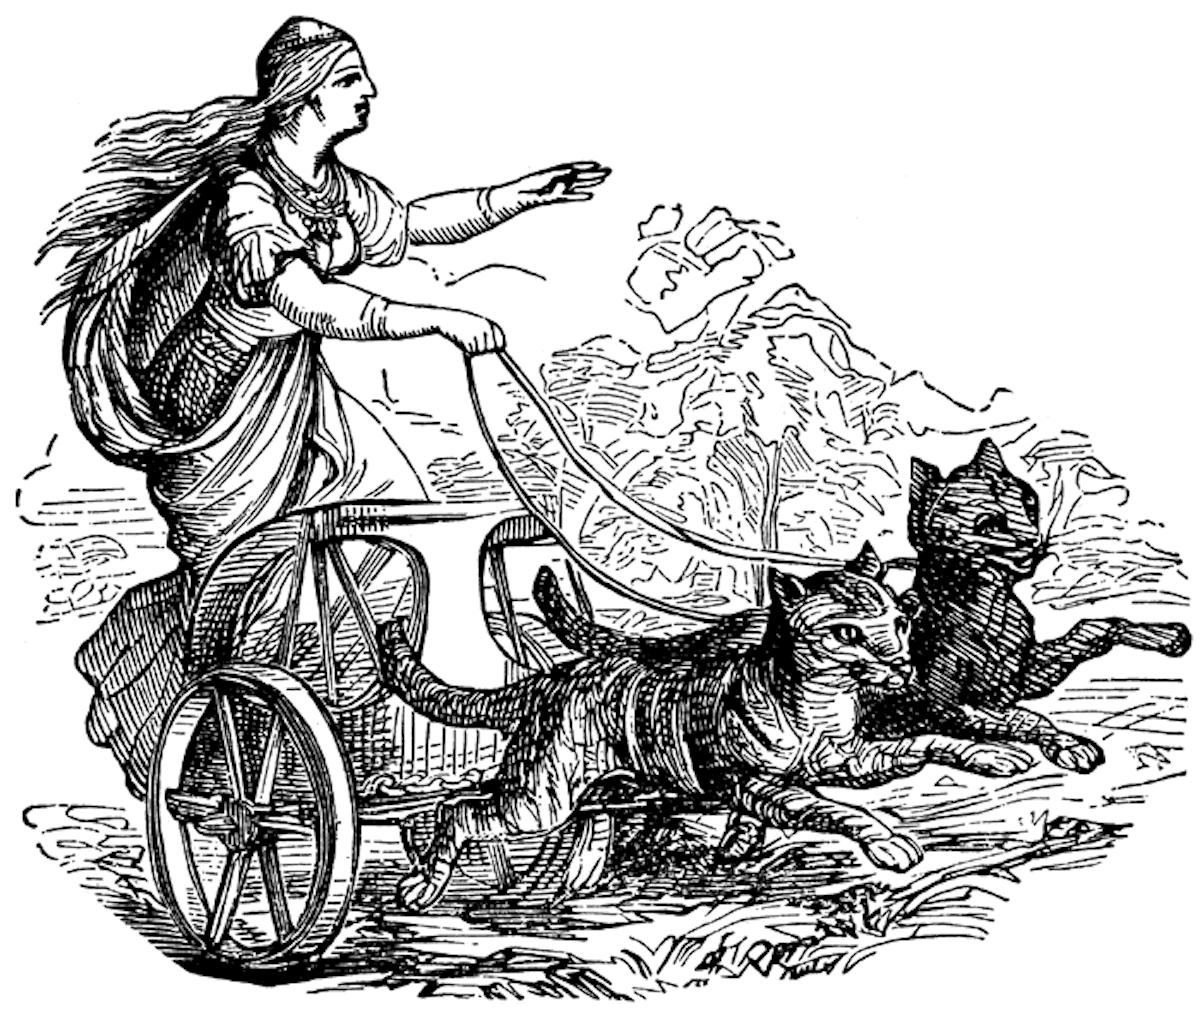 The goddess Freya is pulled in a chariot by two black cats. 